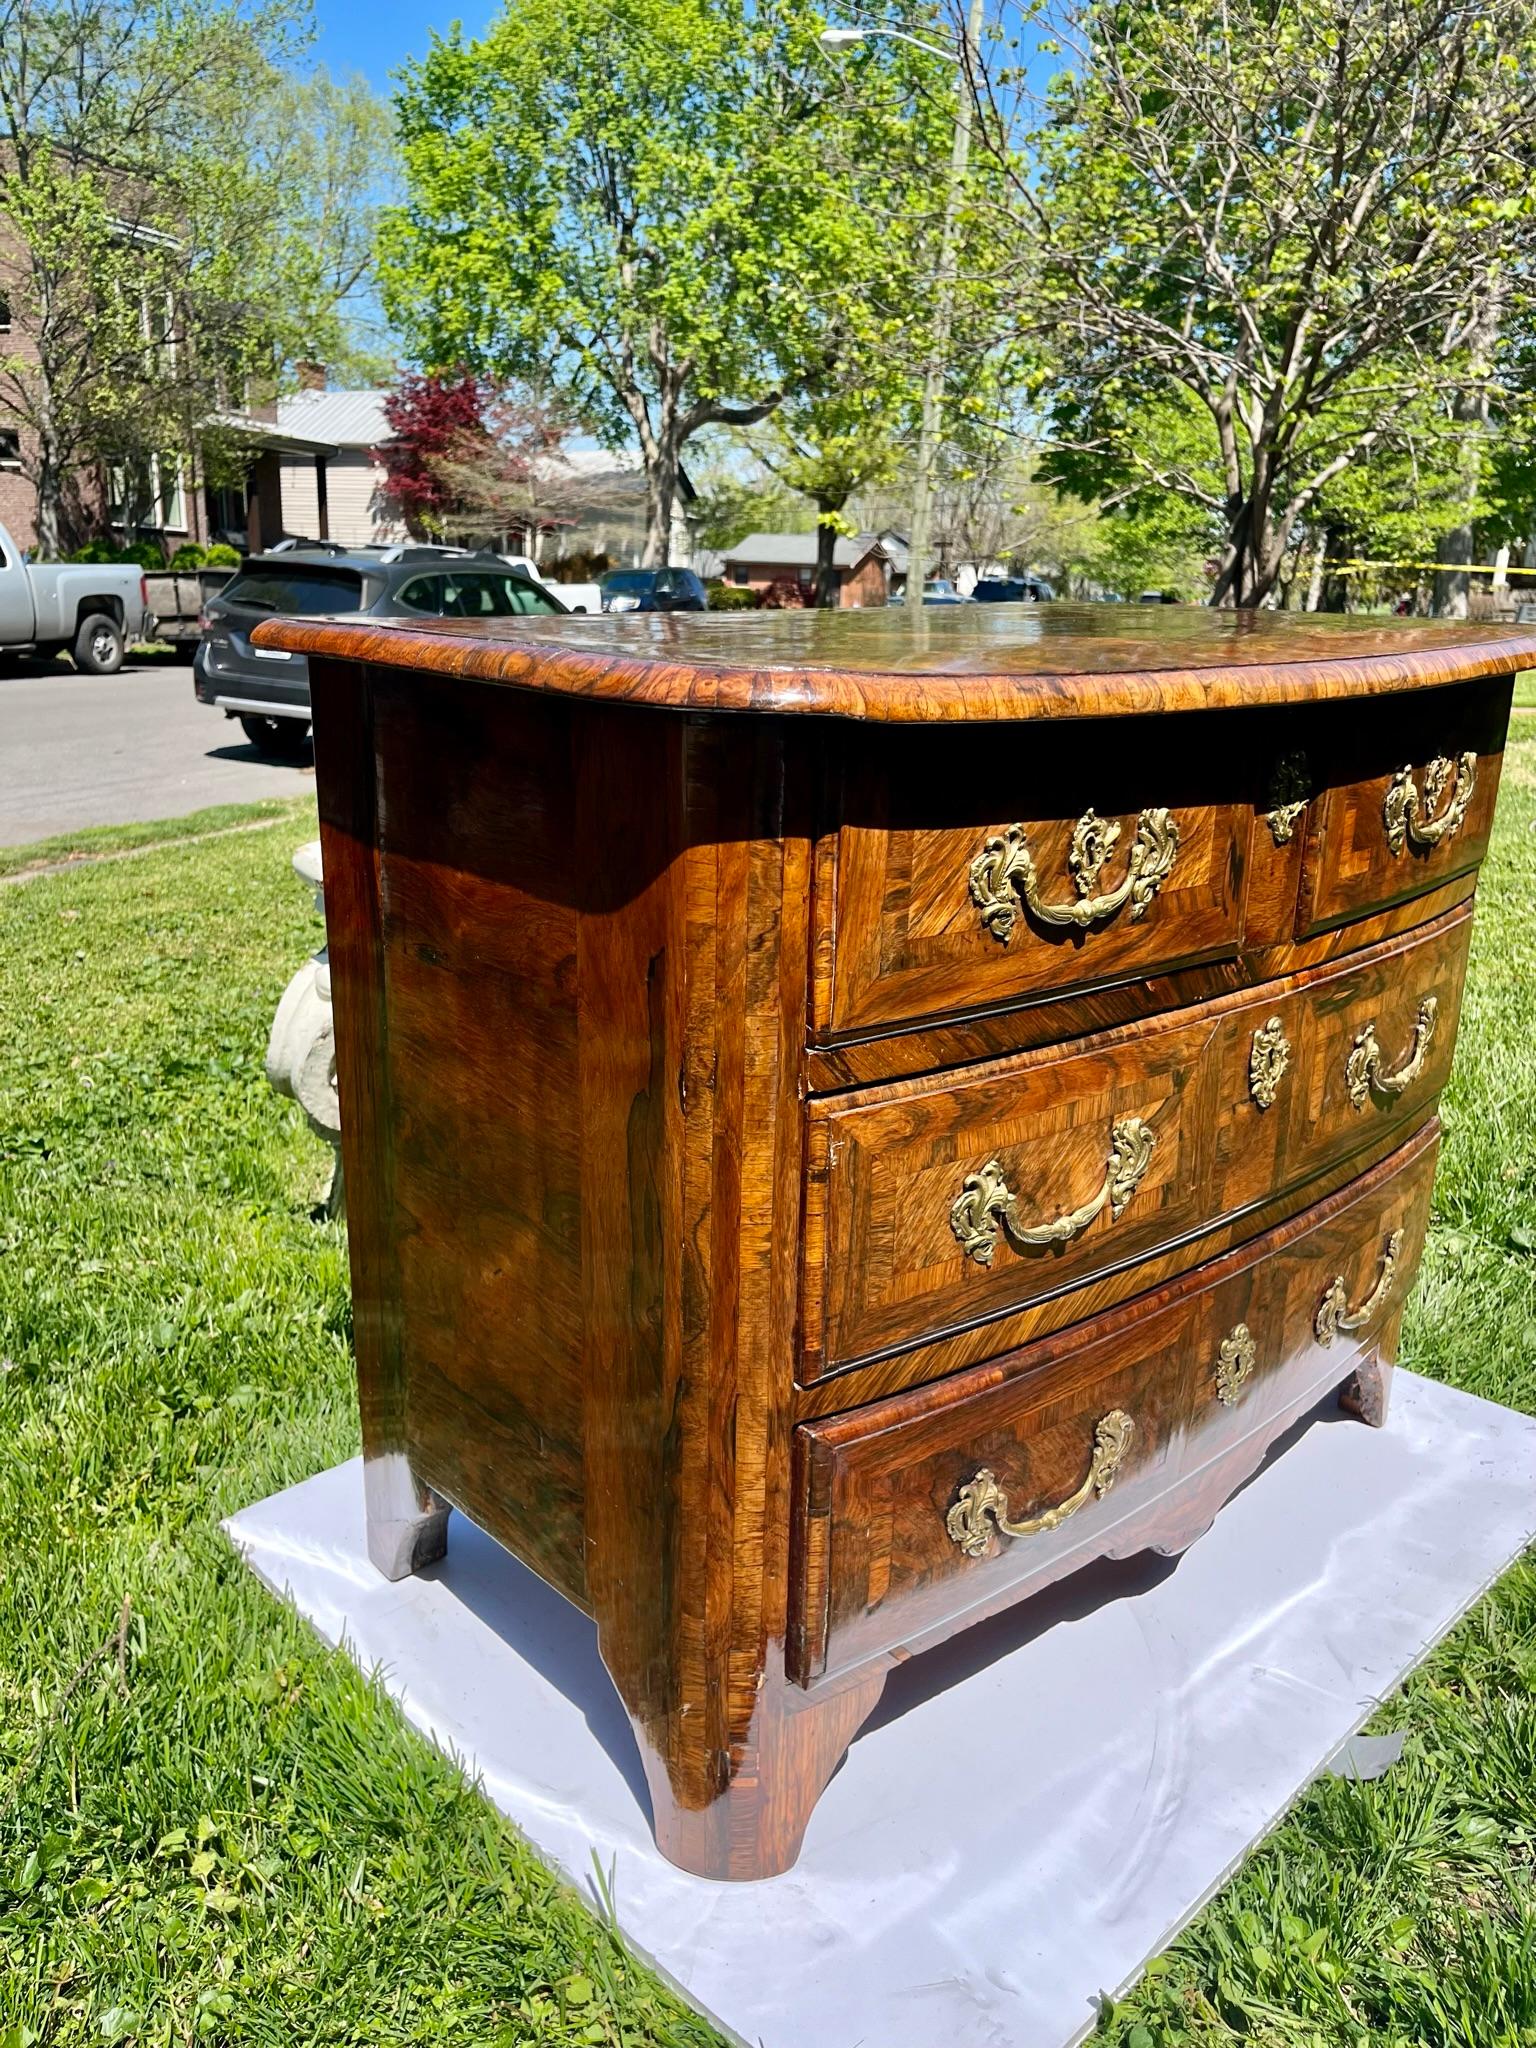 With inlaid parquetry top and parquetry inlaid front corner stiles. Very pretty patina and polish. Perfect bed size chest. 
The front façade in a shallow bow typical of Regence style with rounded front corners . Secondary (drawer sides etc. ) wood